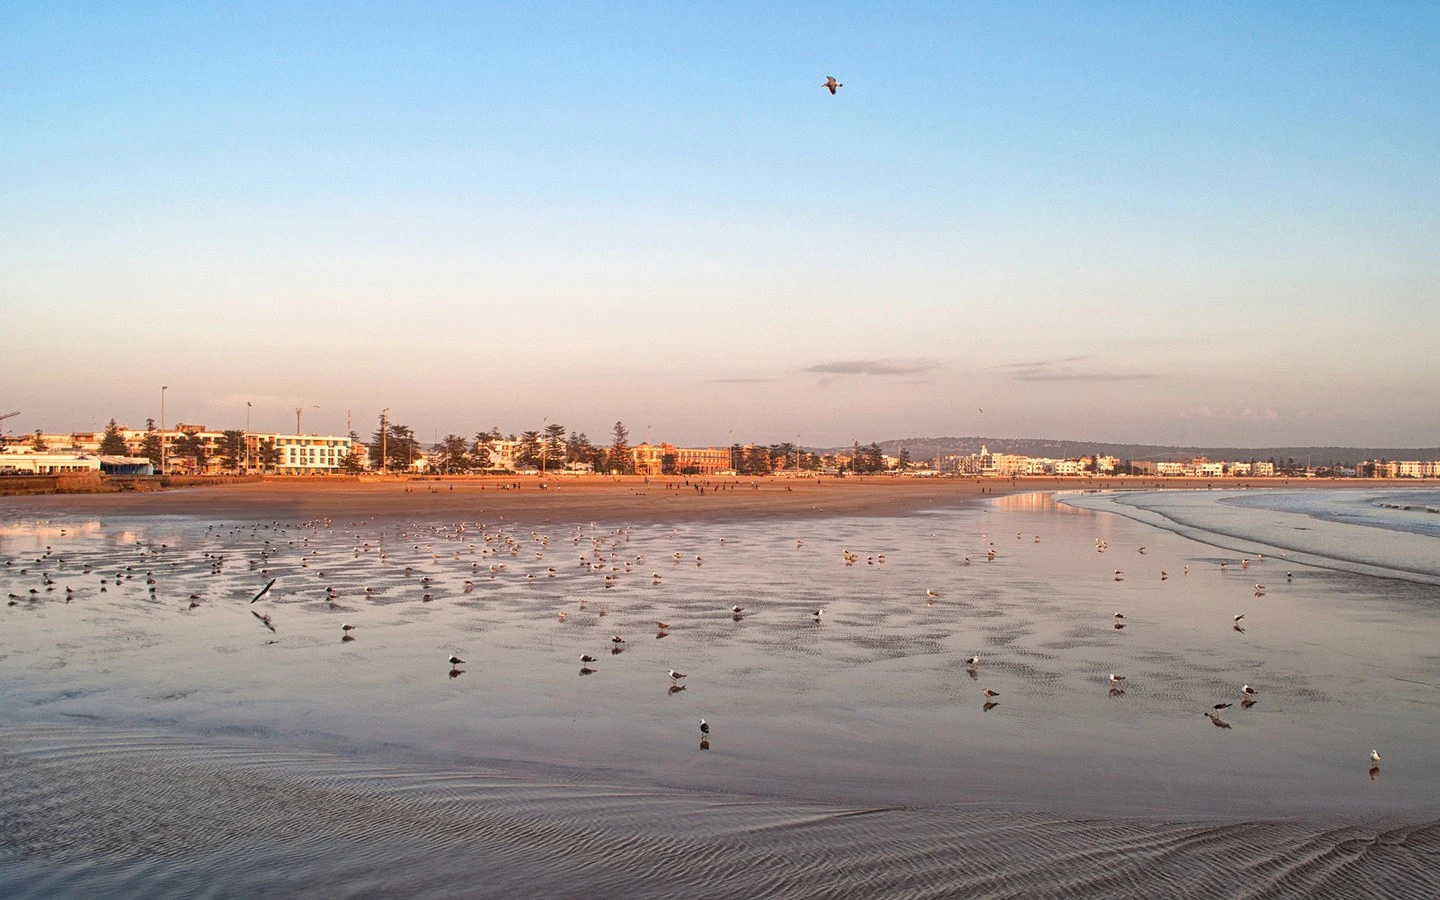 Walking on the beach, one of the best things to do in Essaouira